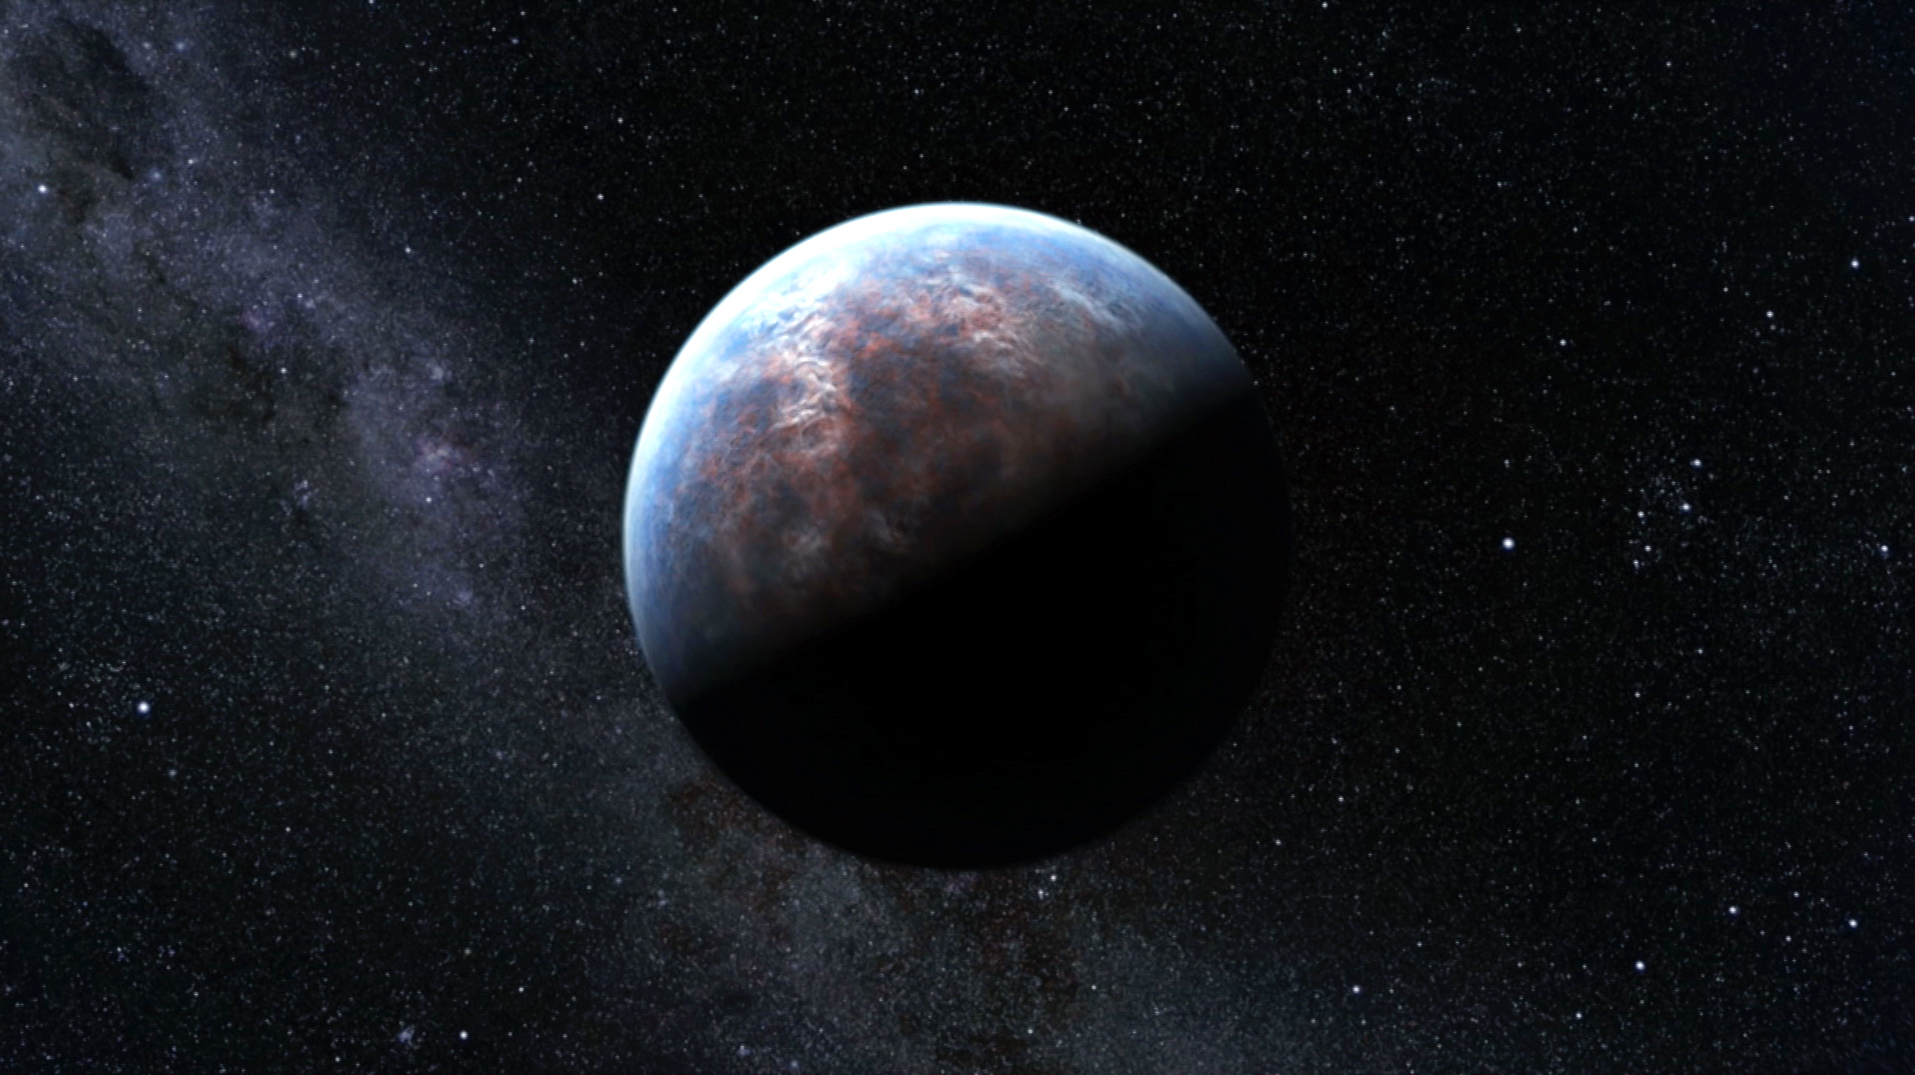 Excited Reports of 'Habitable Planets' Need to Come Back Down to Earth